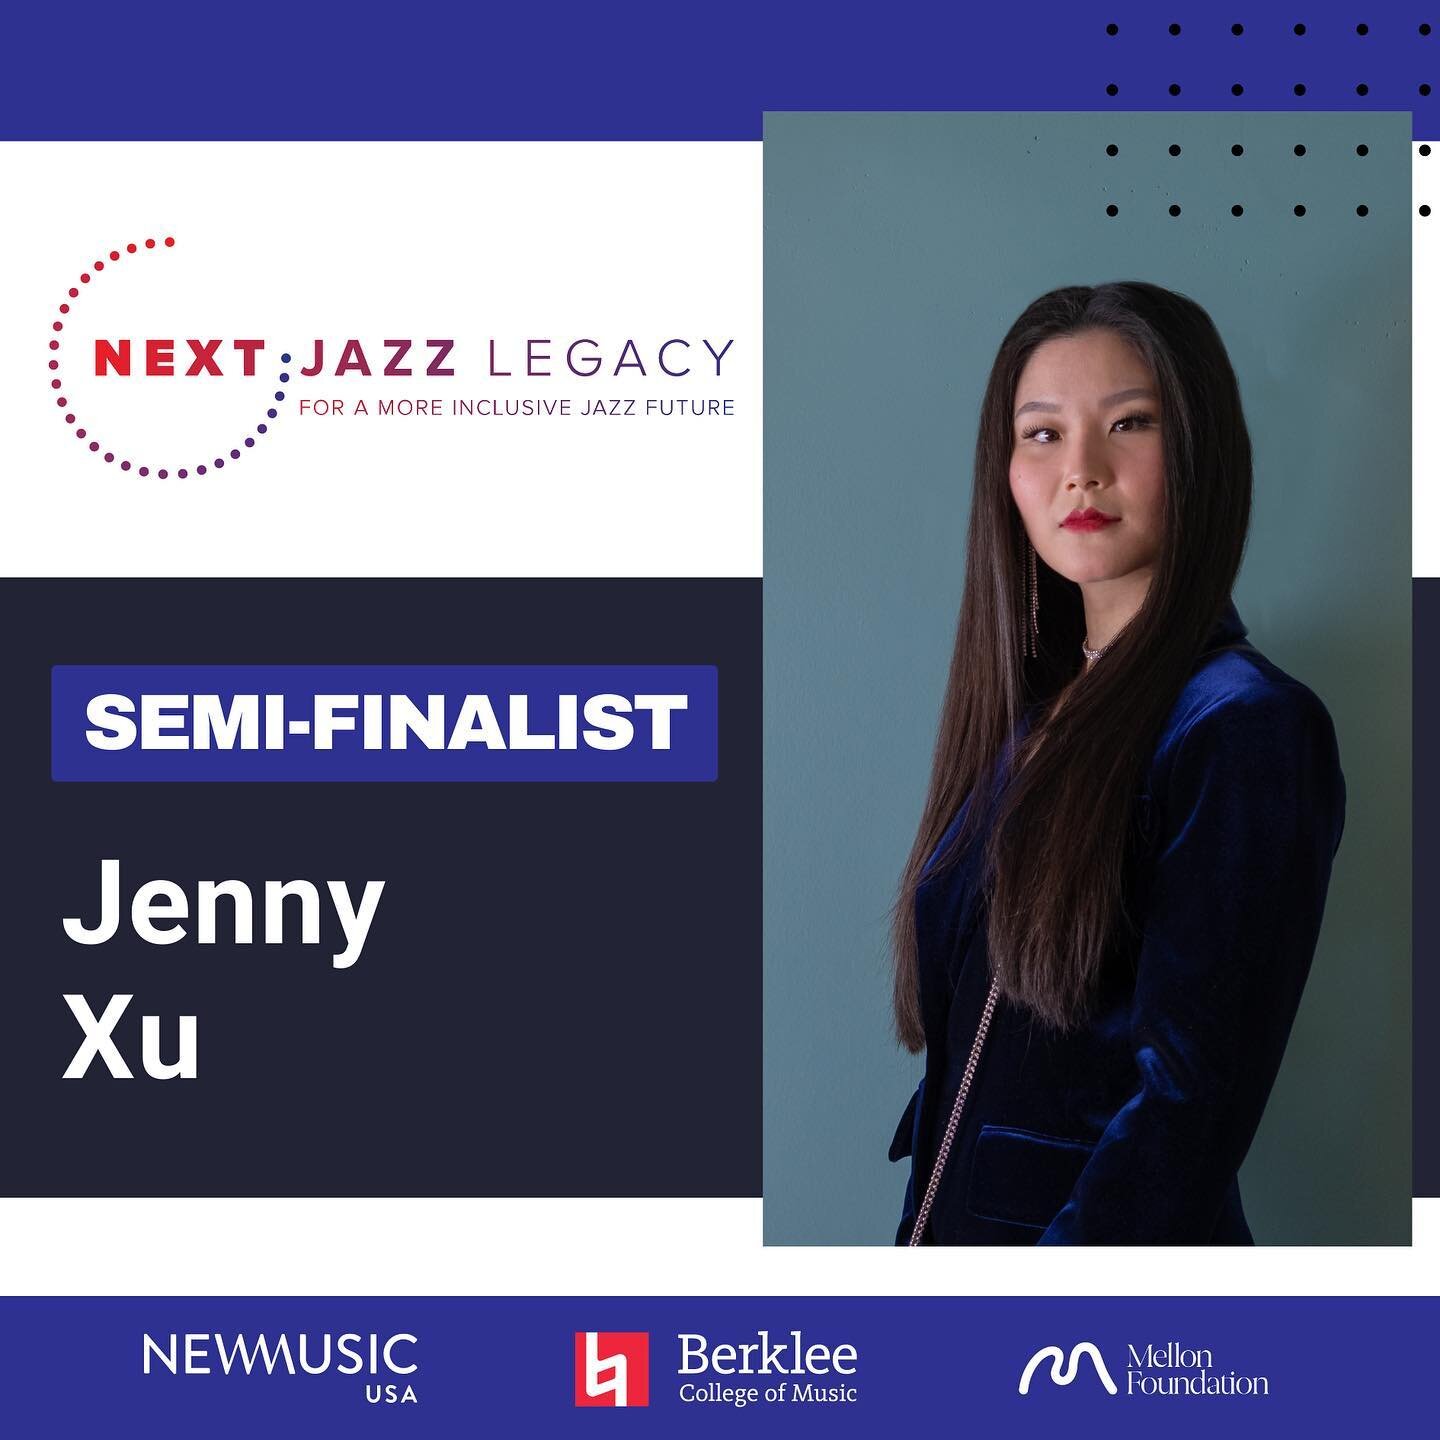 Honored to have been selected as a semi-finalist for this year&rsquo;s #nextjazzlegacy cohort. 

Equally stoked to get to share the news on World Piano Day! 

Huge congrats to my fellow semi-finalists and this year&rsquo;s awardees. I&rsquo;m very ex